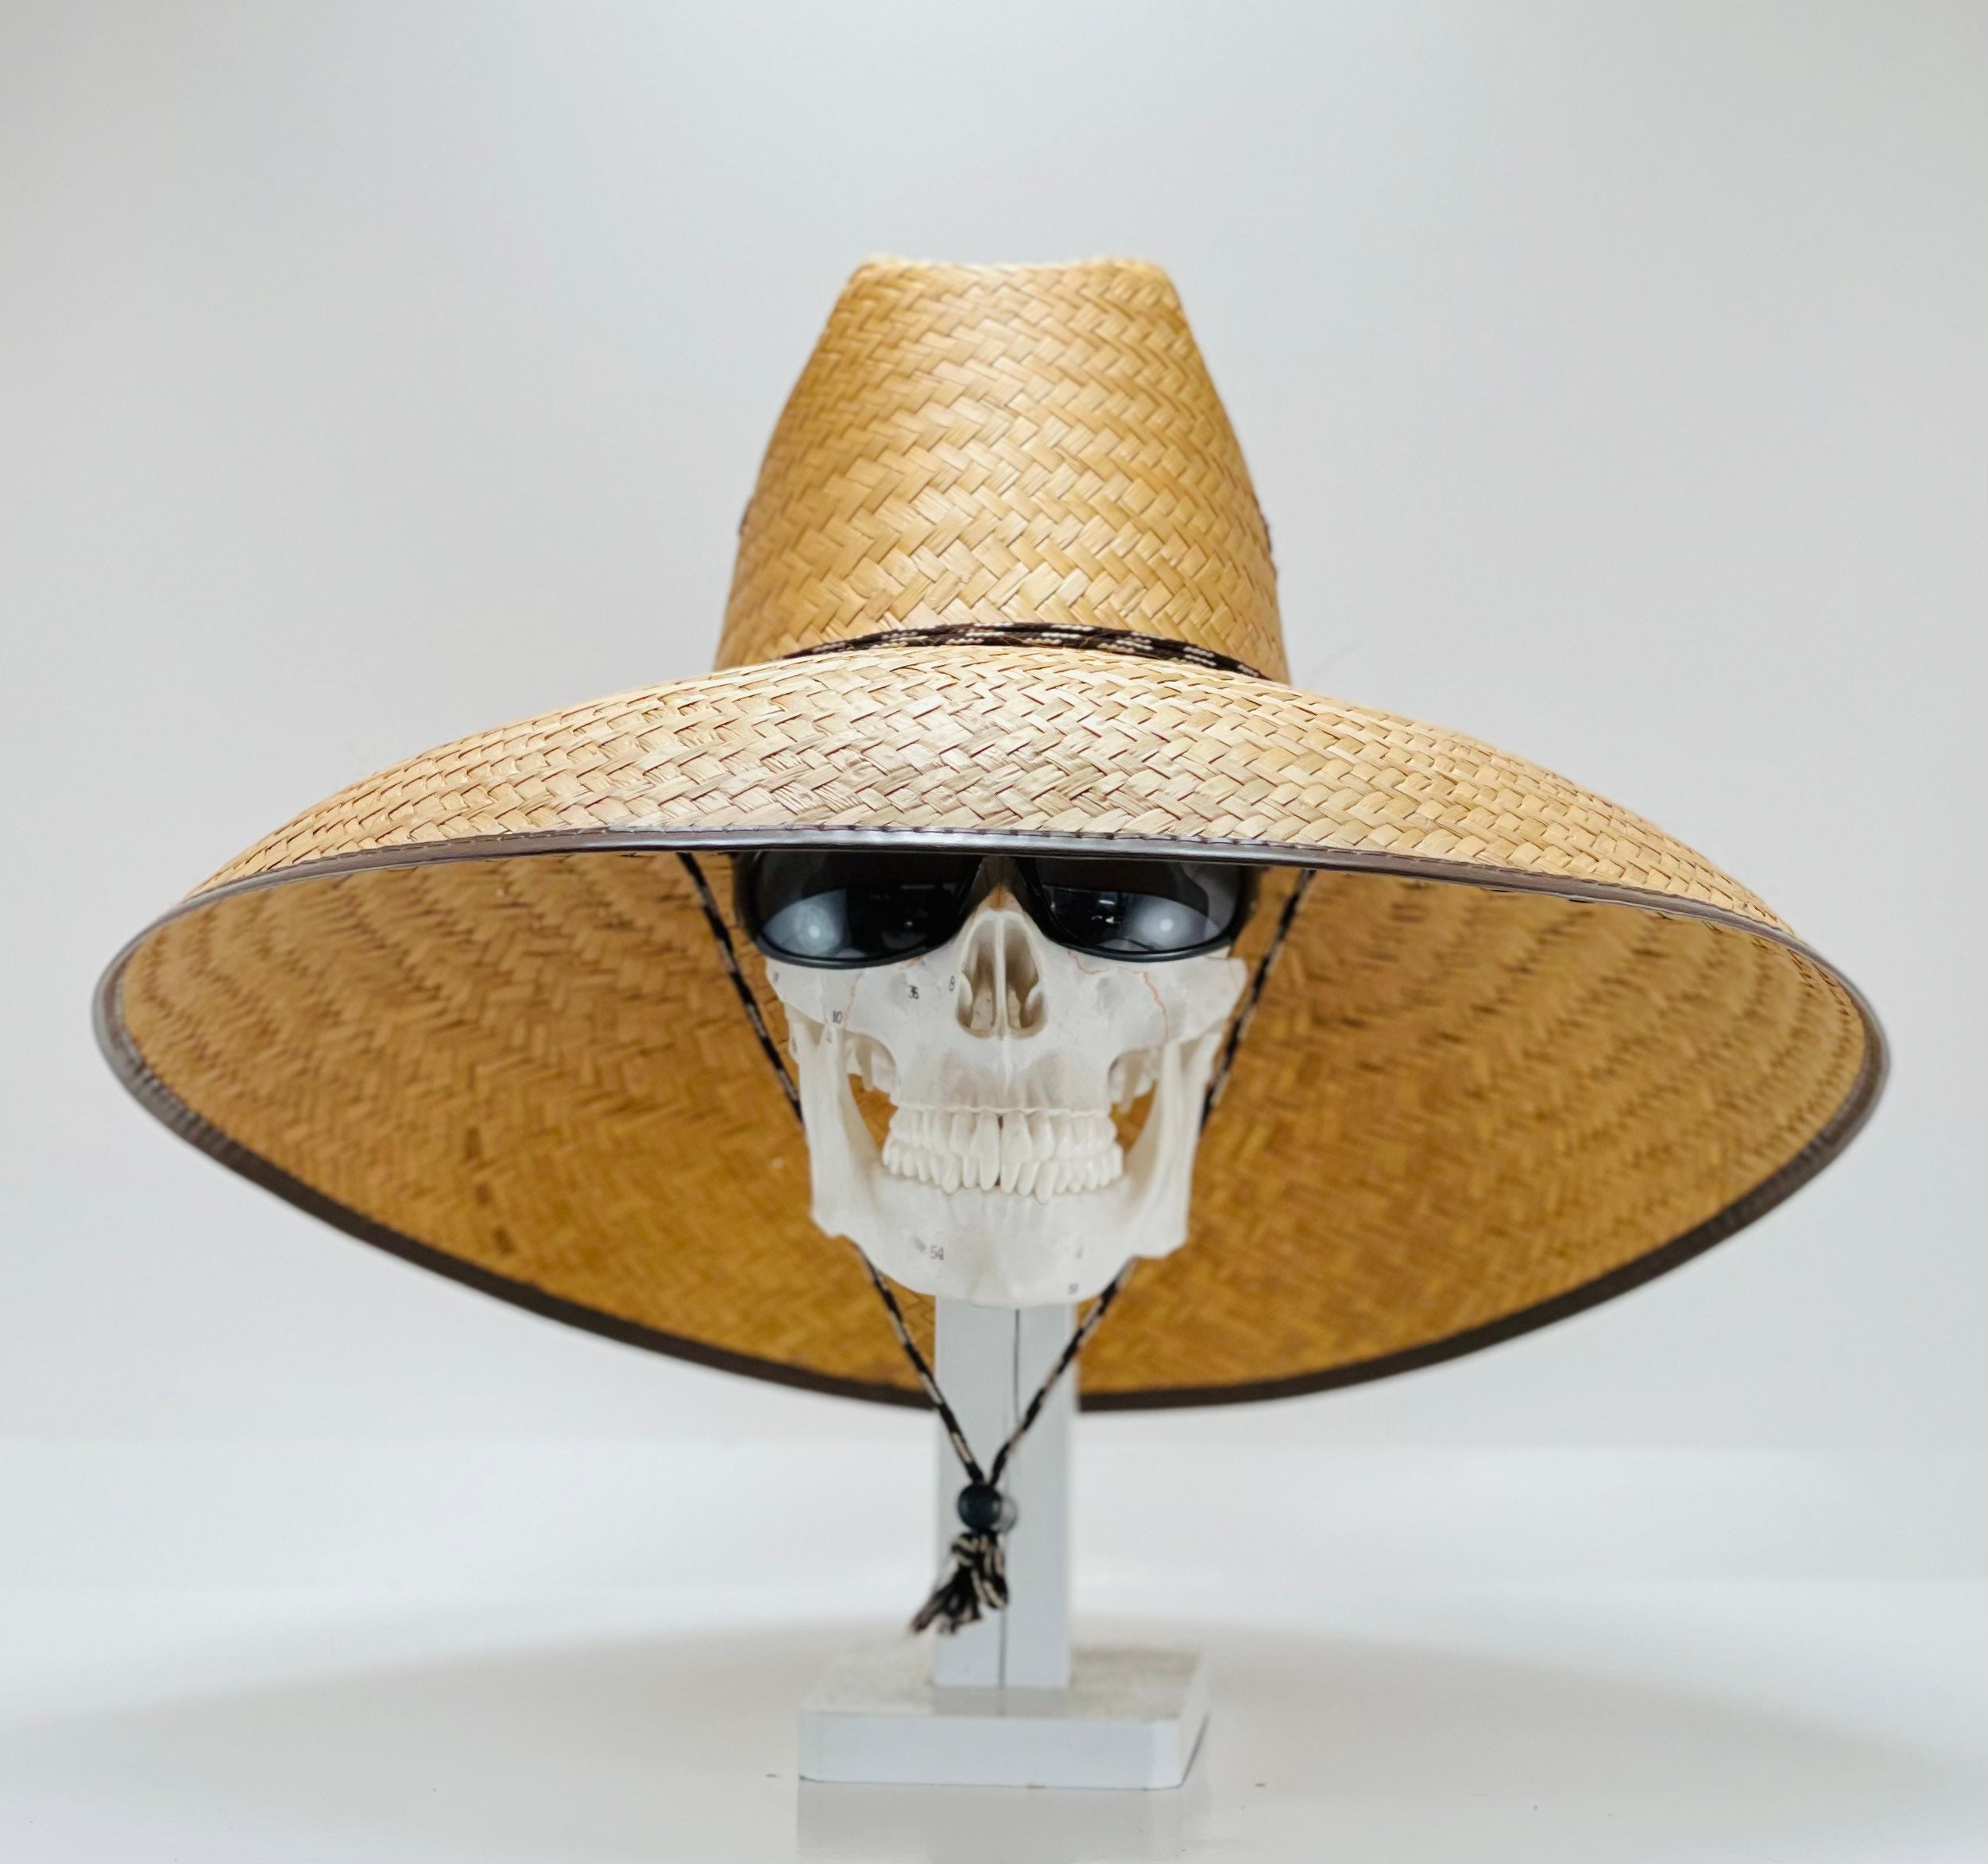 It's Hot Maximum Sun Coverage Straw Hats Unisex, All Natural Grown